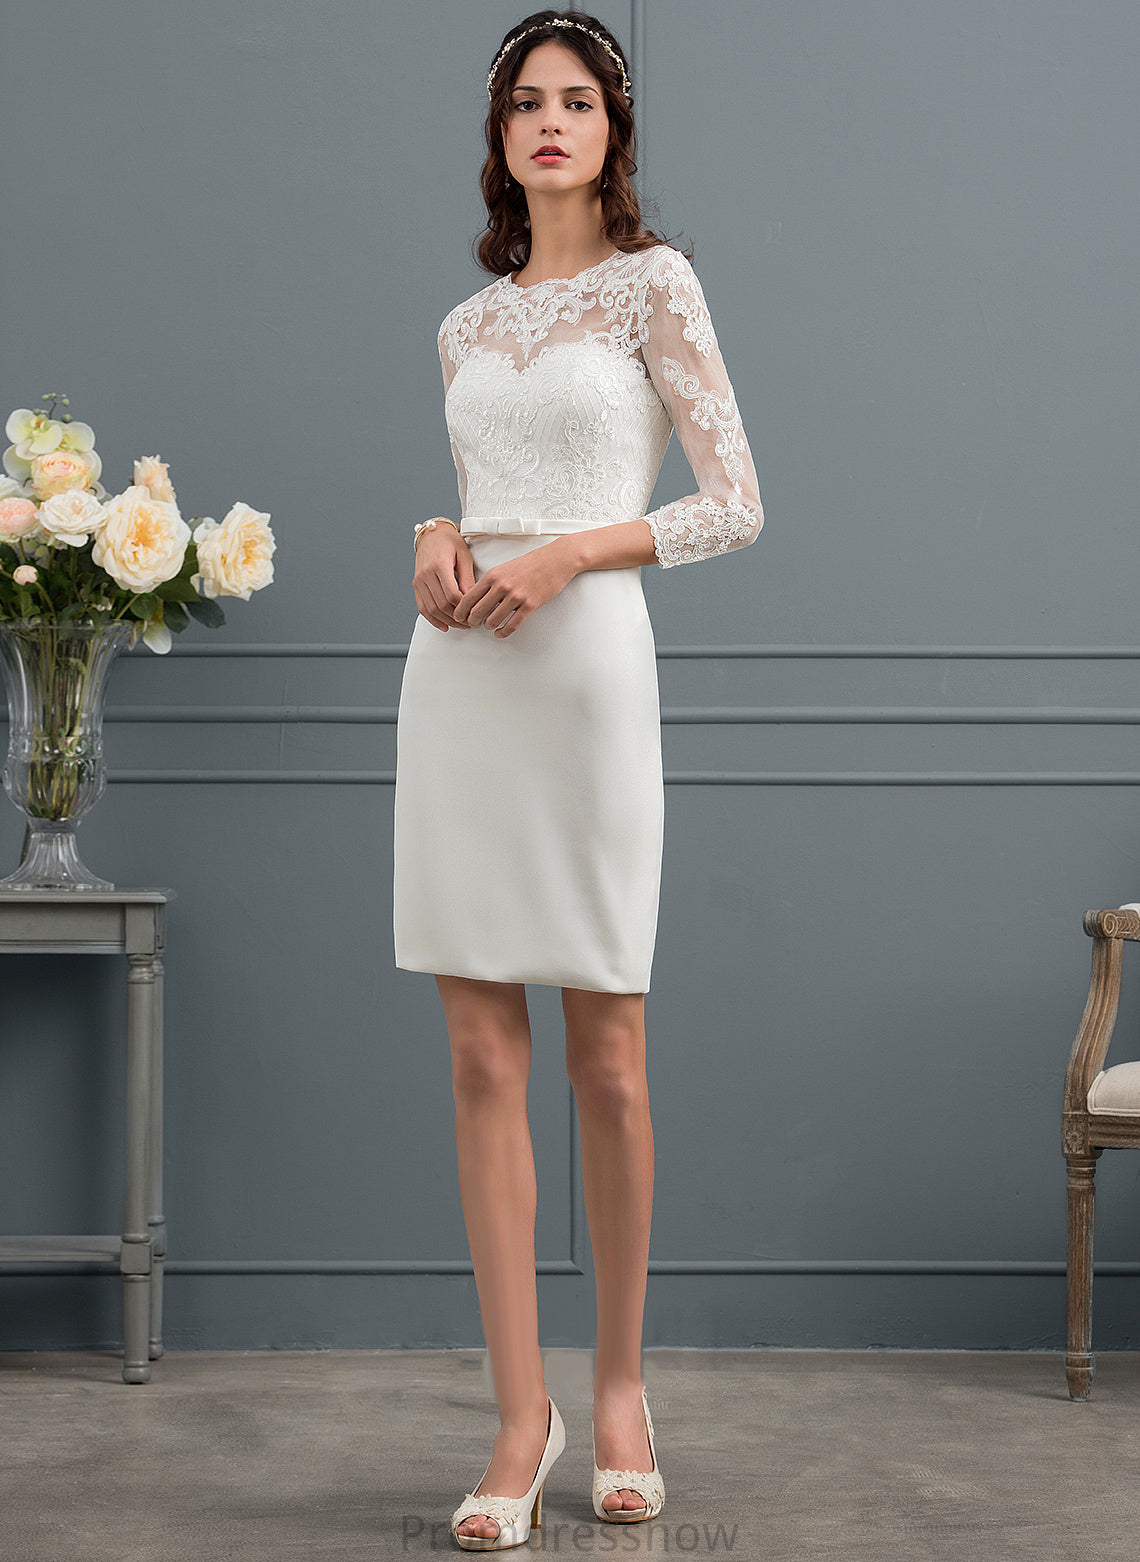 Sequins Knee-Length Sheath/Column Adrienne Wedding Dresses Illusion With Wedding Lace Bow(s) Dress